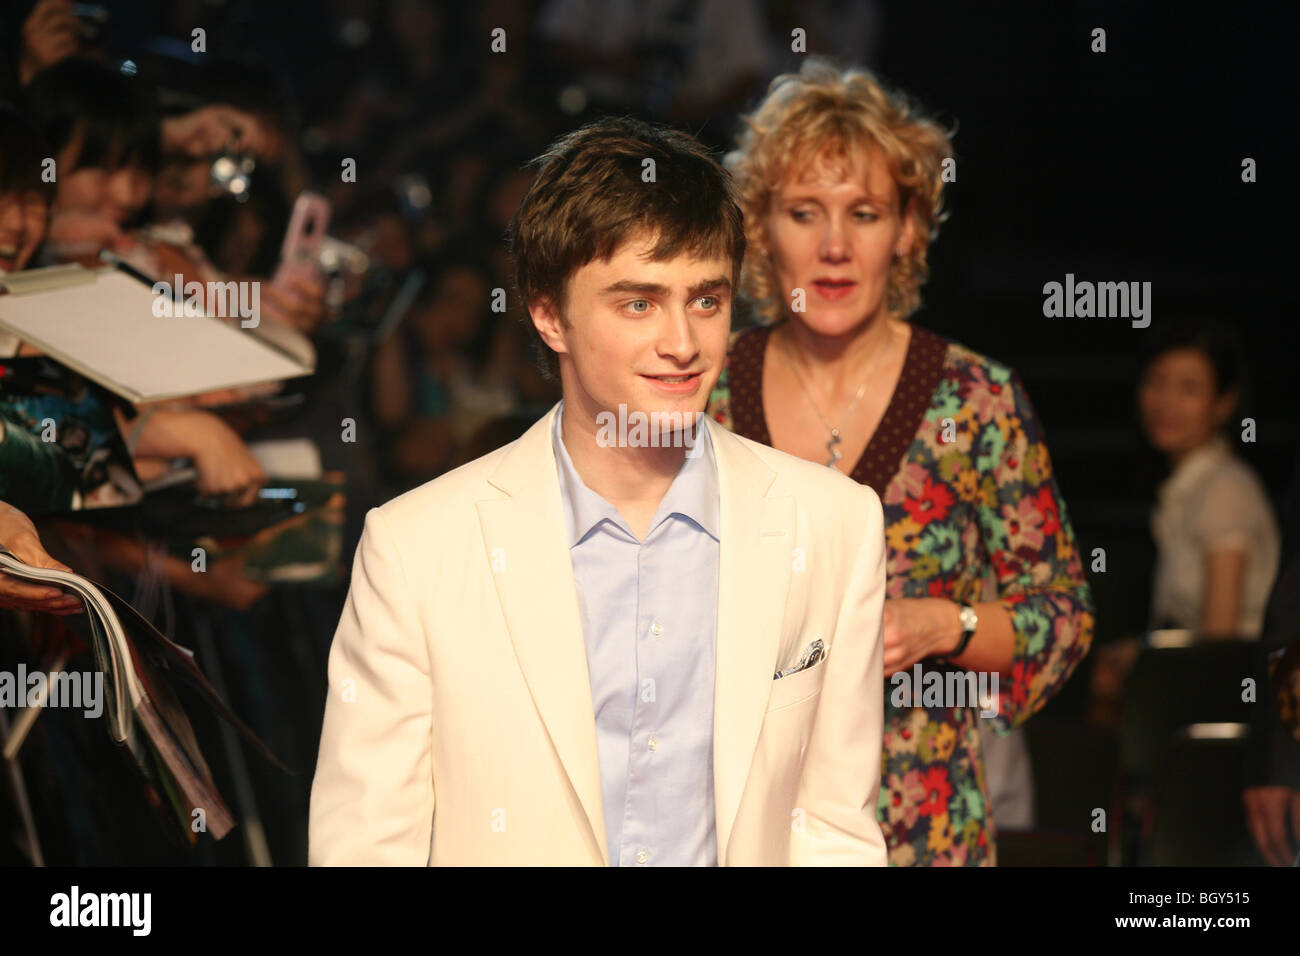 actor Daniel Radcliffe at red carpet premiere of 5th Harry Potter movie 'Harry Potter and the Order of the Phoenix', Tokyo Japan Stock Photo